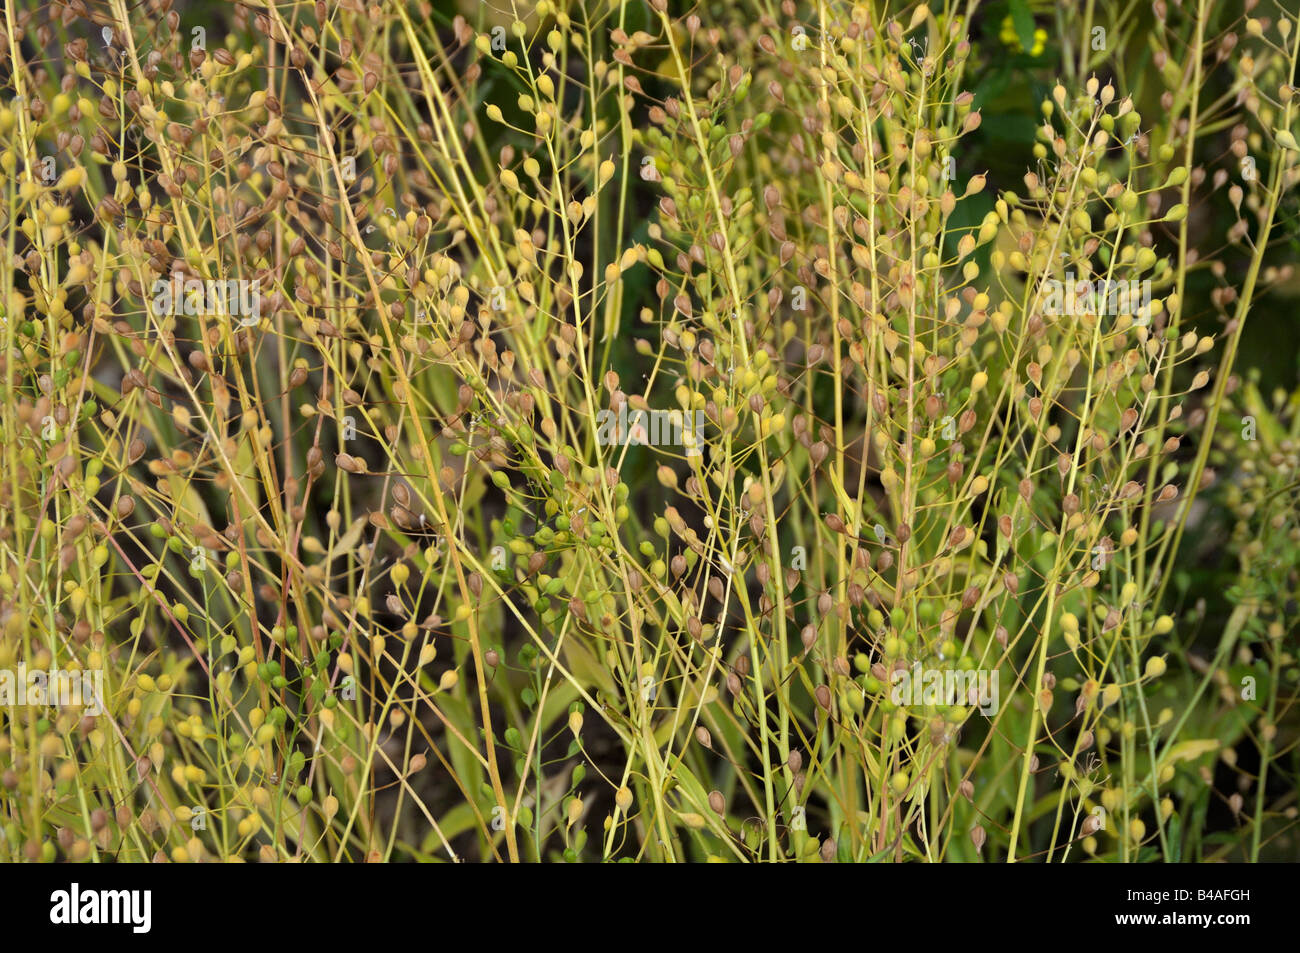 Wild Flax, Linseed Dodder (Camelina sativa), plants with seeds Stock Photo